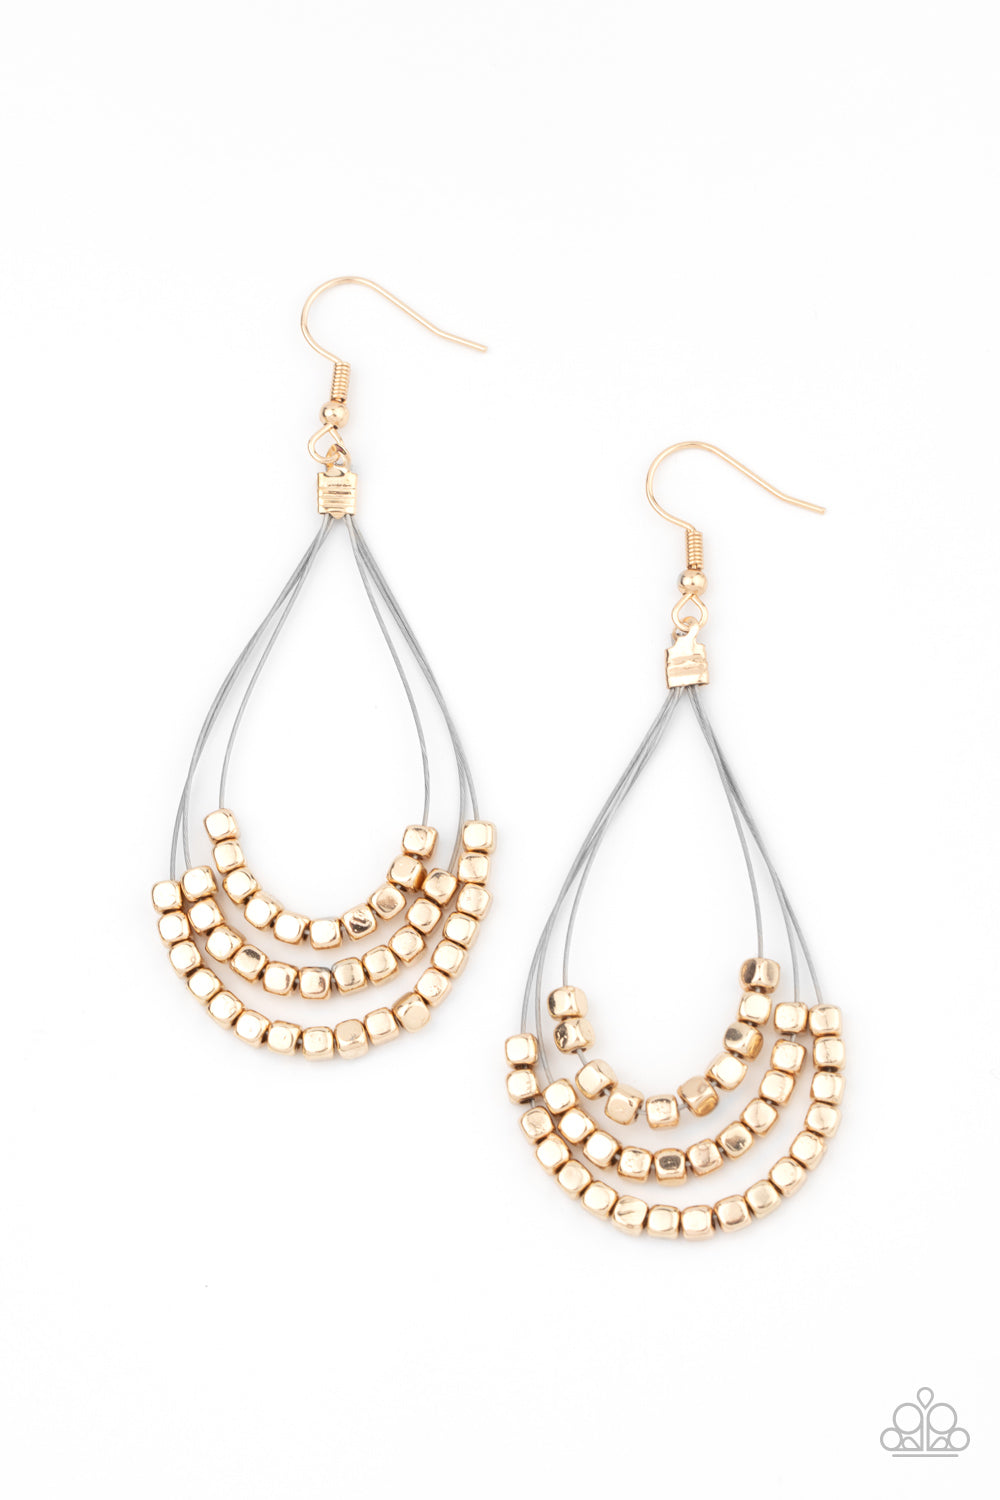 Paparazzi Accessories - Off The Blocks Shimmer #E496 - Gold Earrings